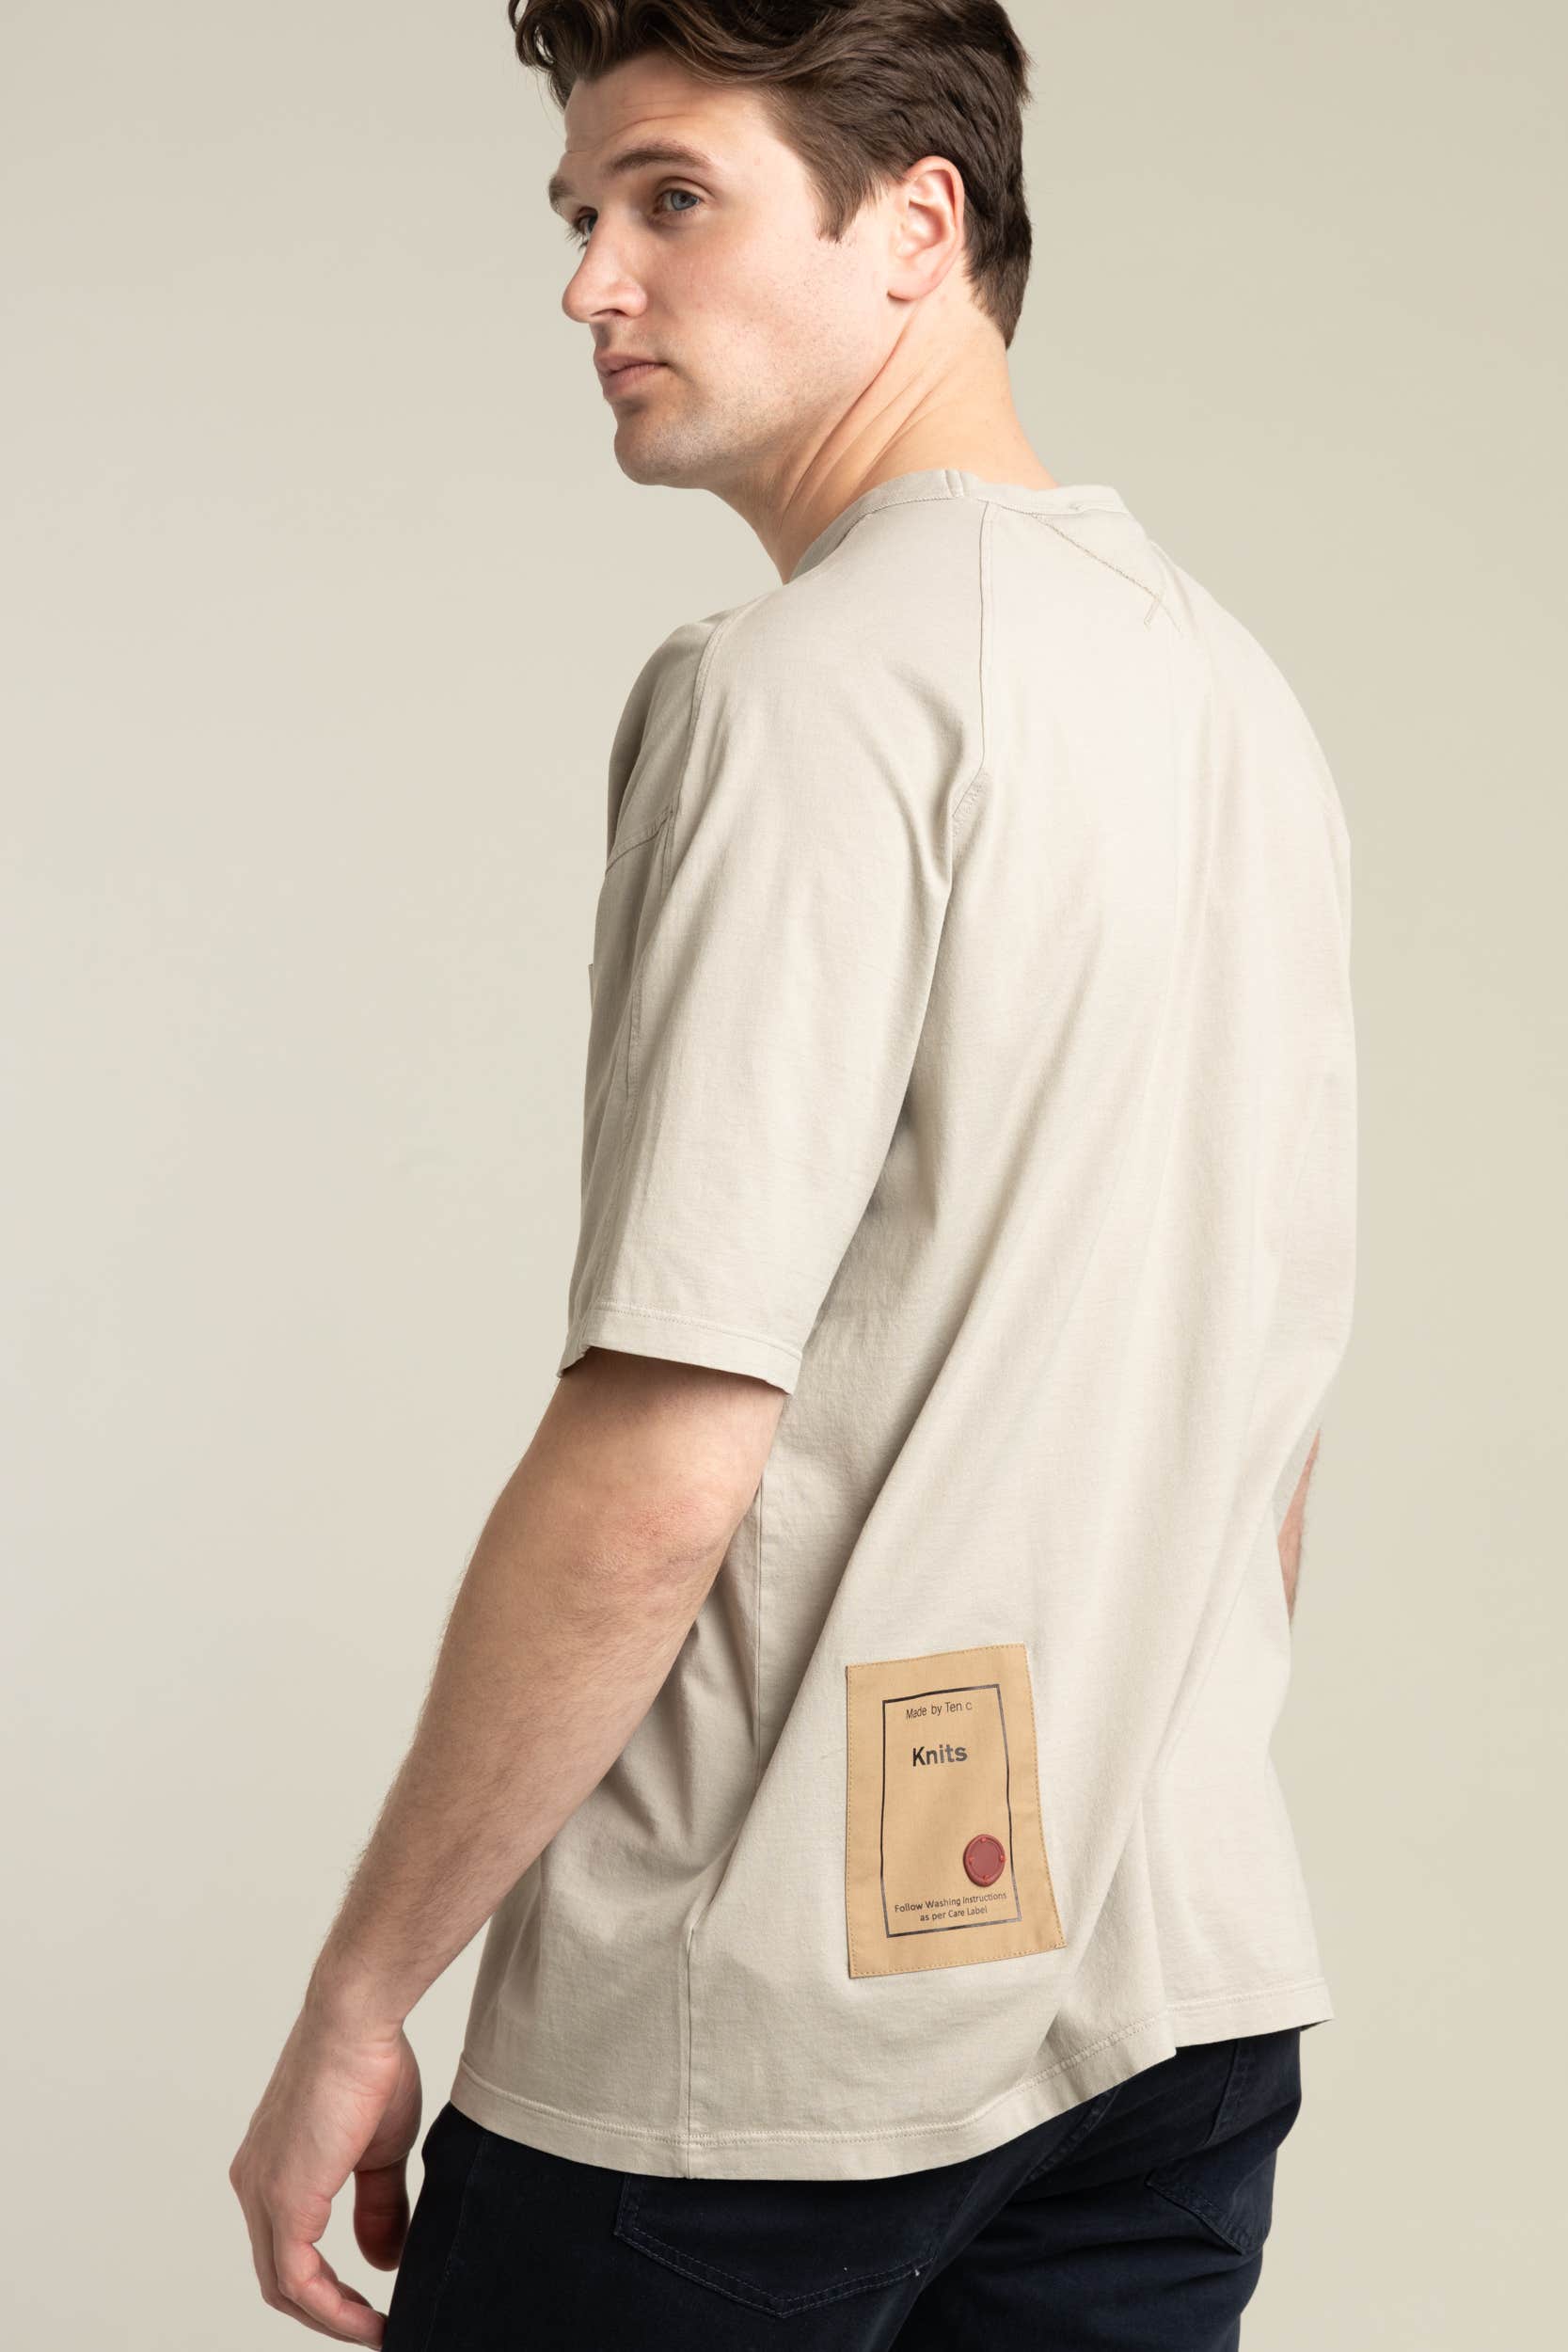 Grey T-Shirt with Knits Patch